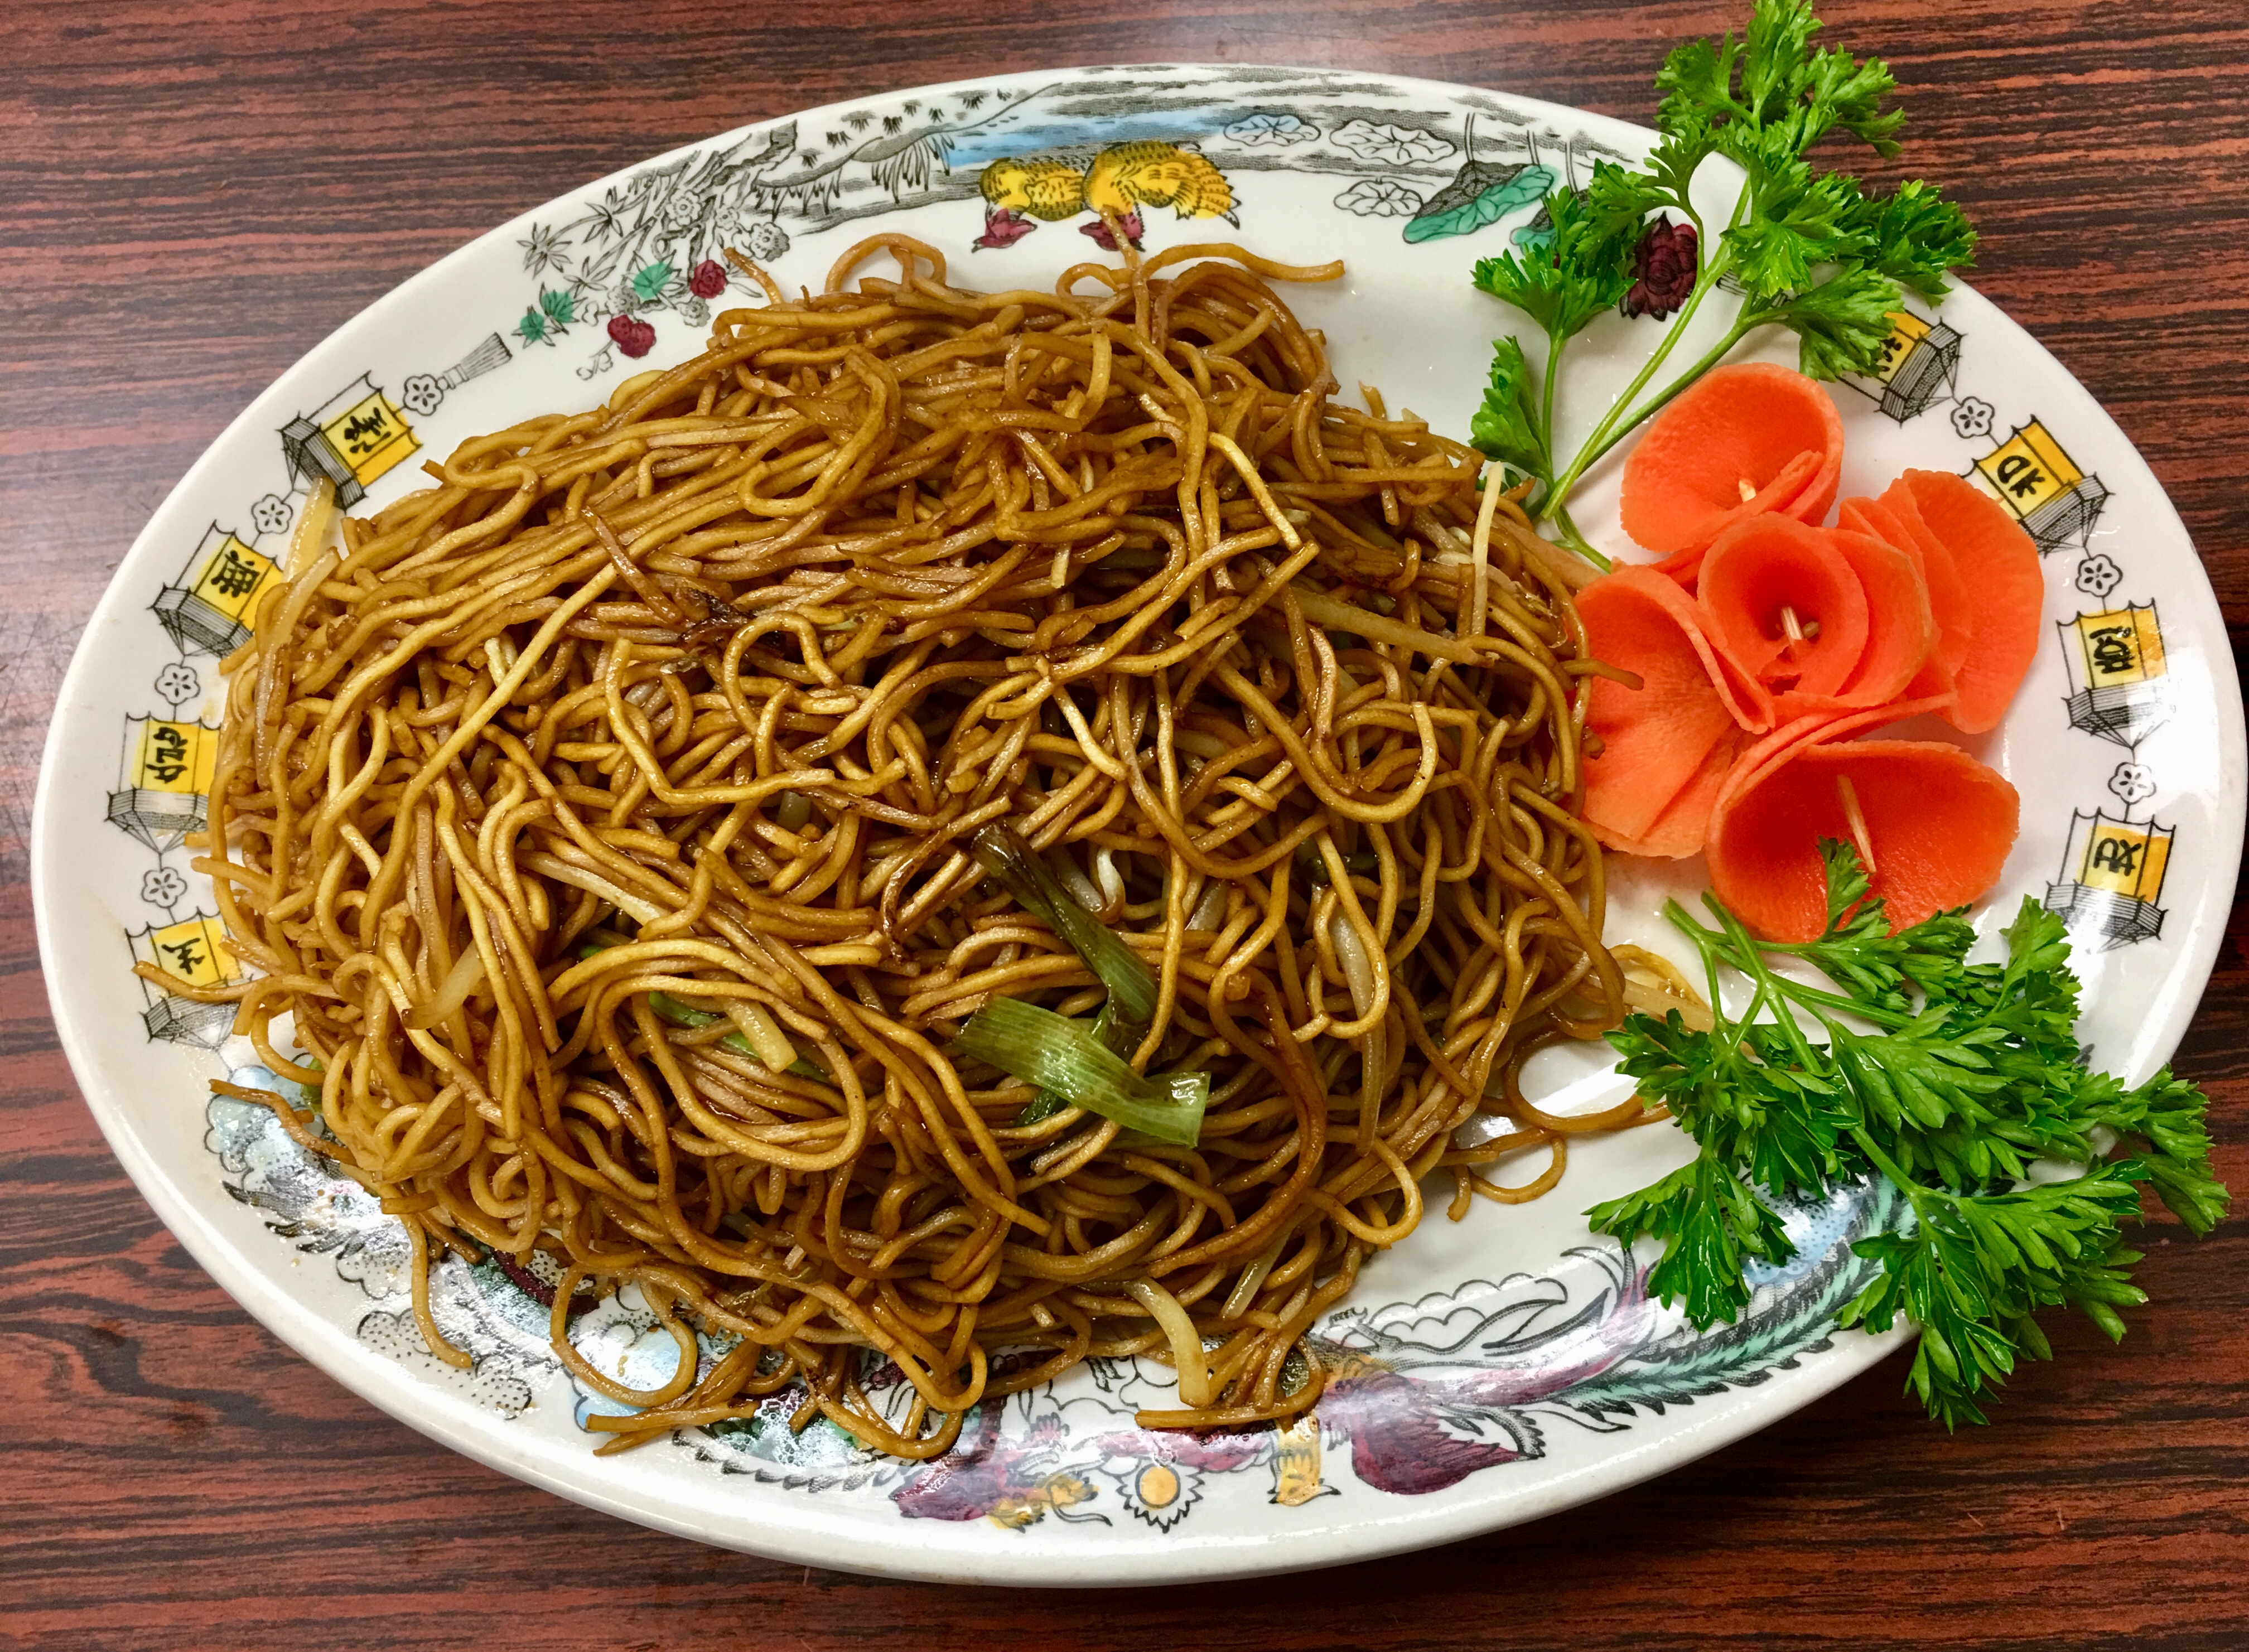 Cantonese Fried Noodles